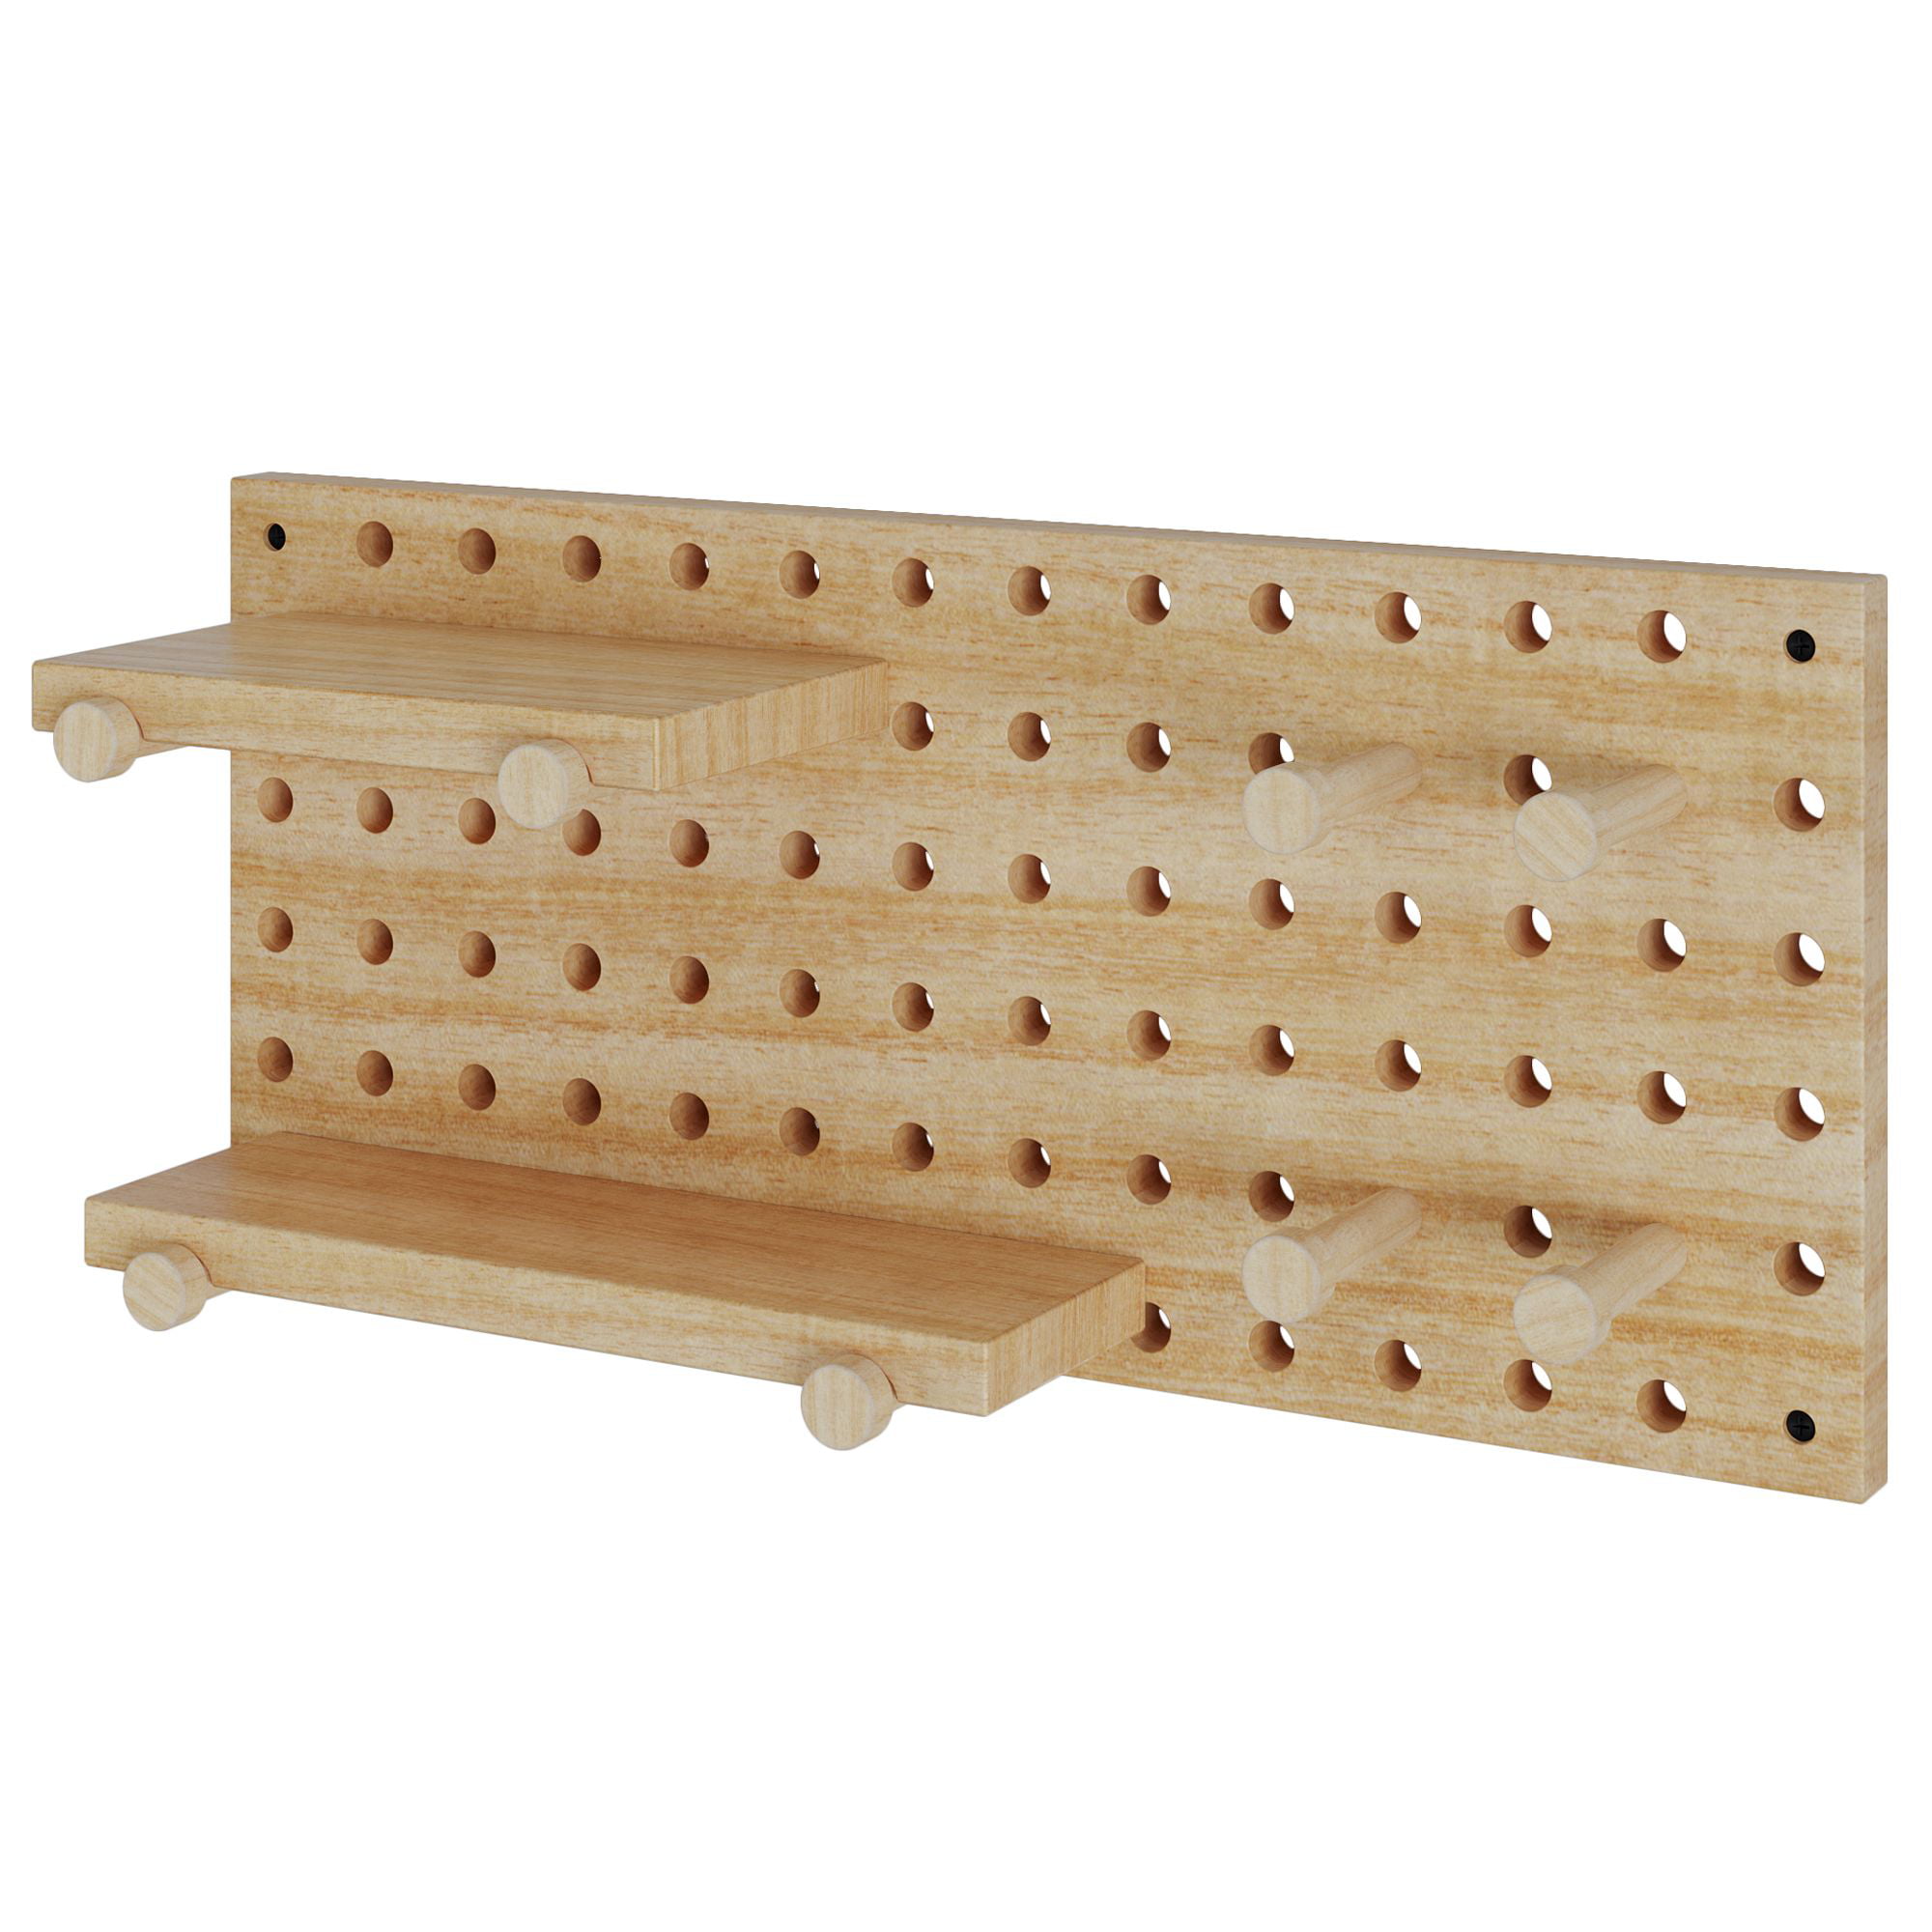 How to build a wooden peg board wall - The Shepparton Adviser